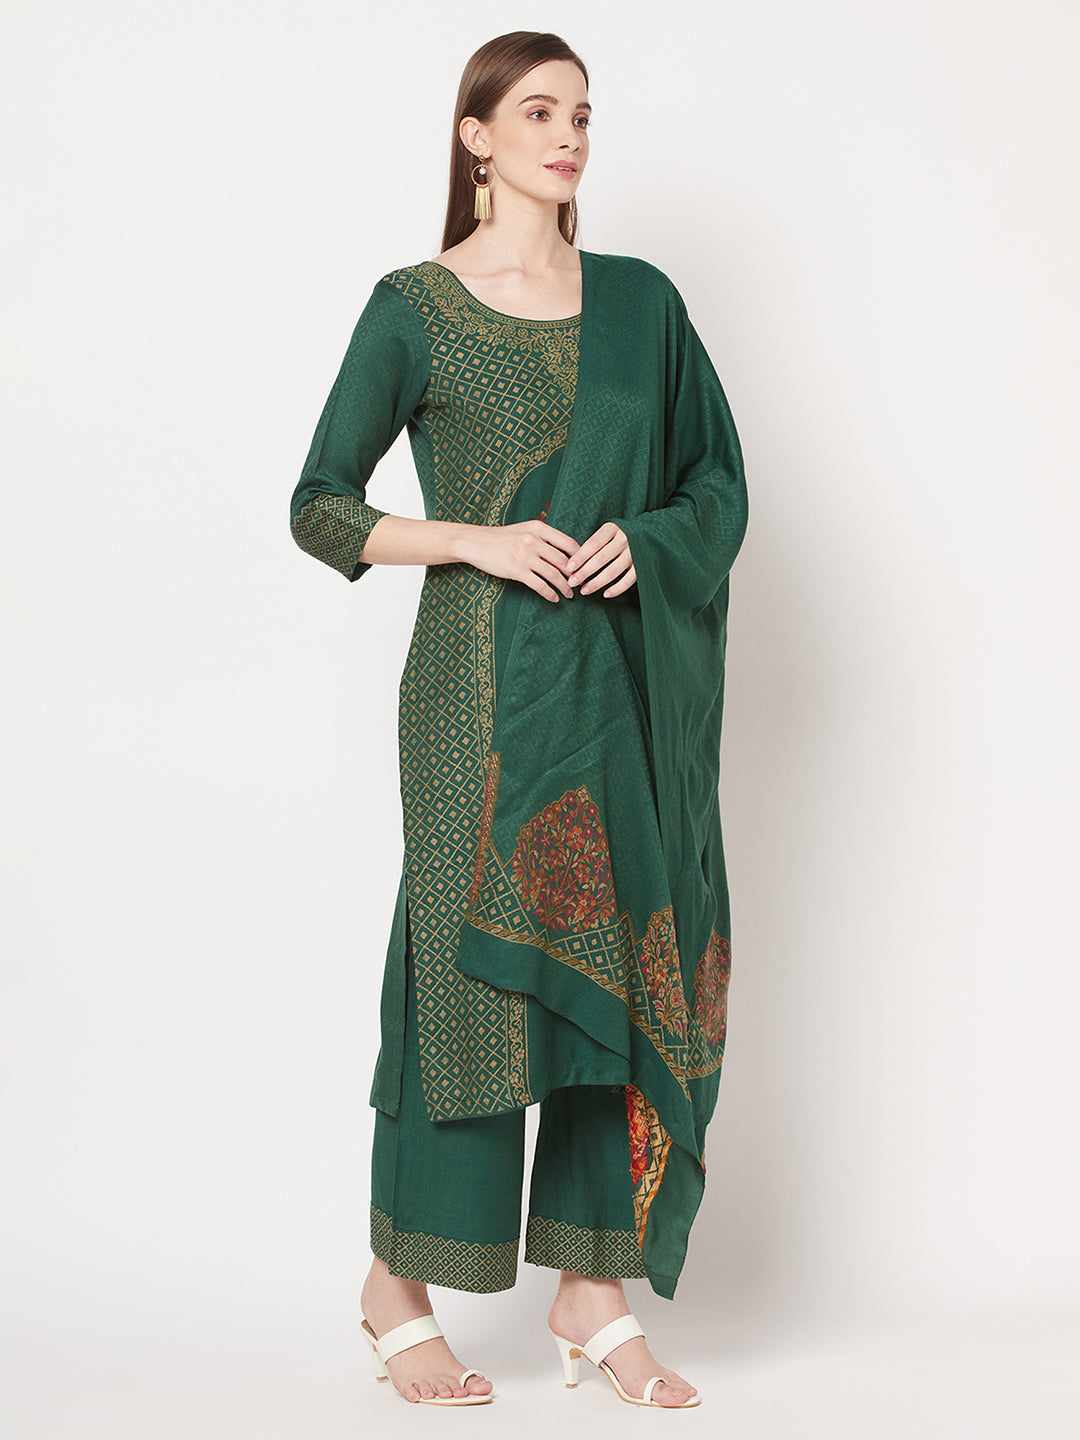 Acro Wool Green Dress Material with Stole